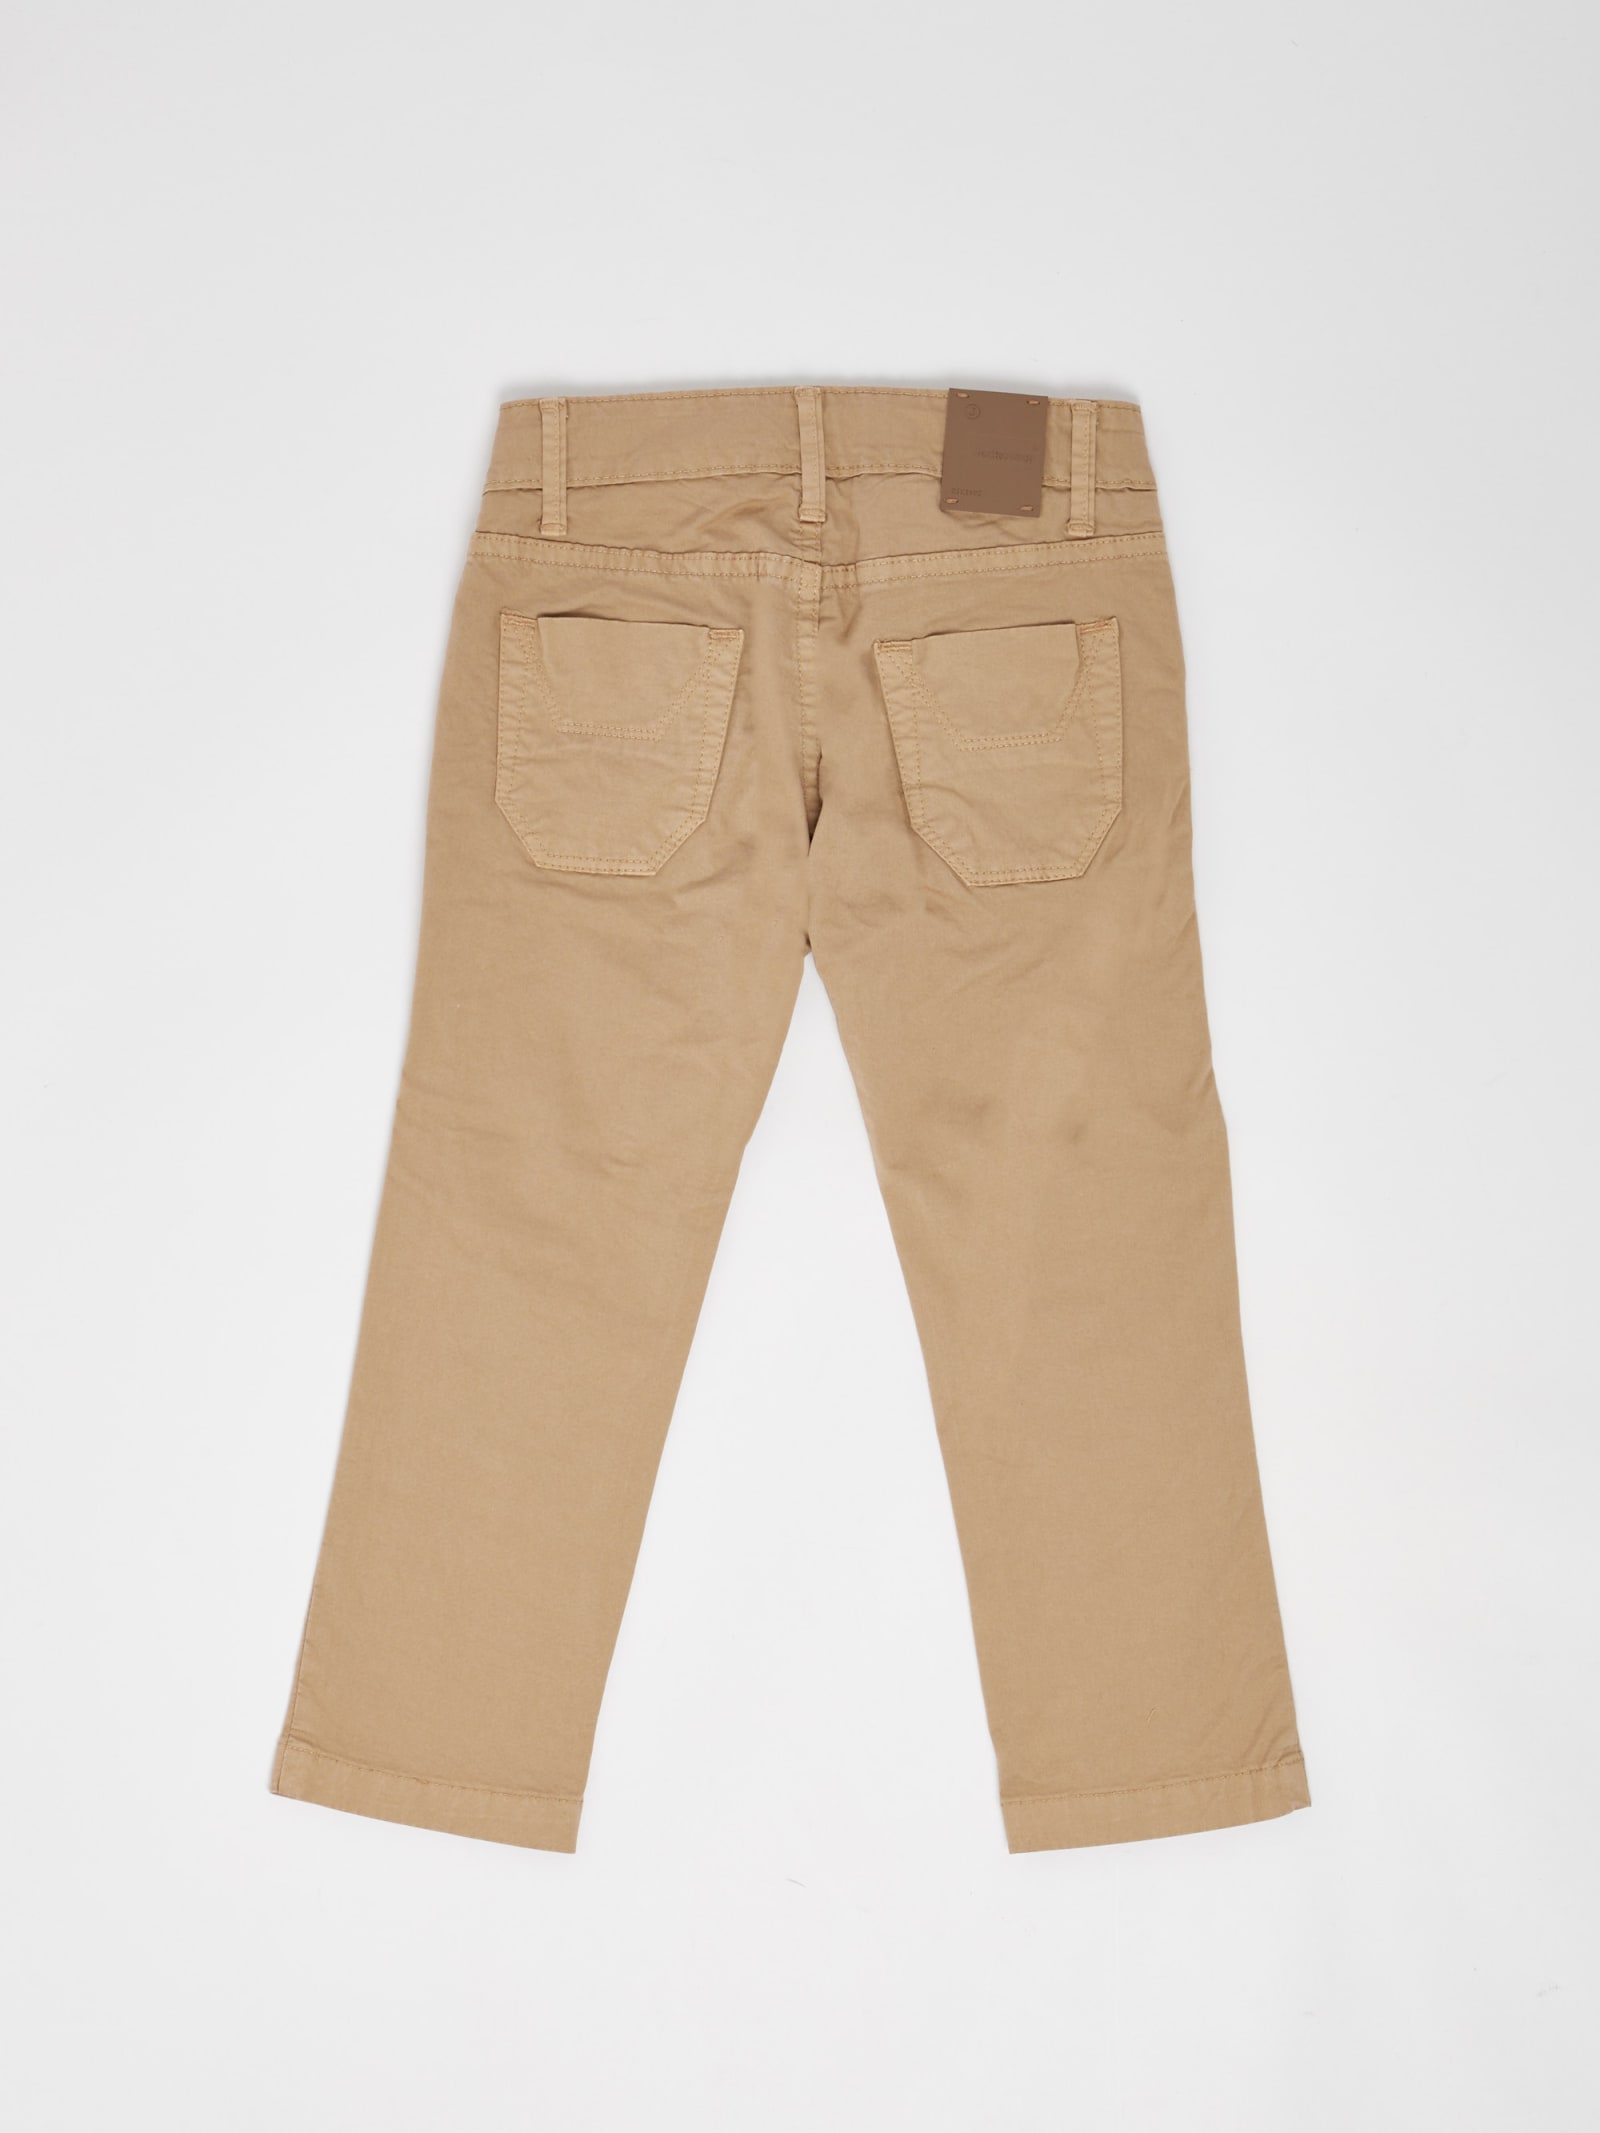 JECKERSON TROUSERS TROUSERS 